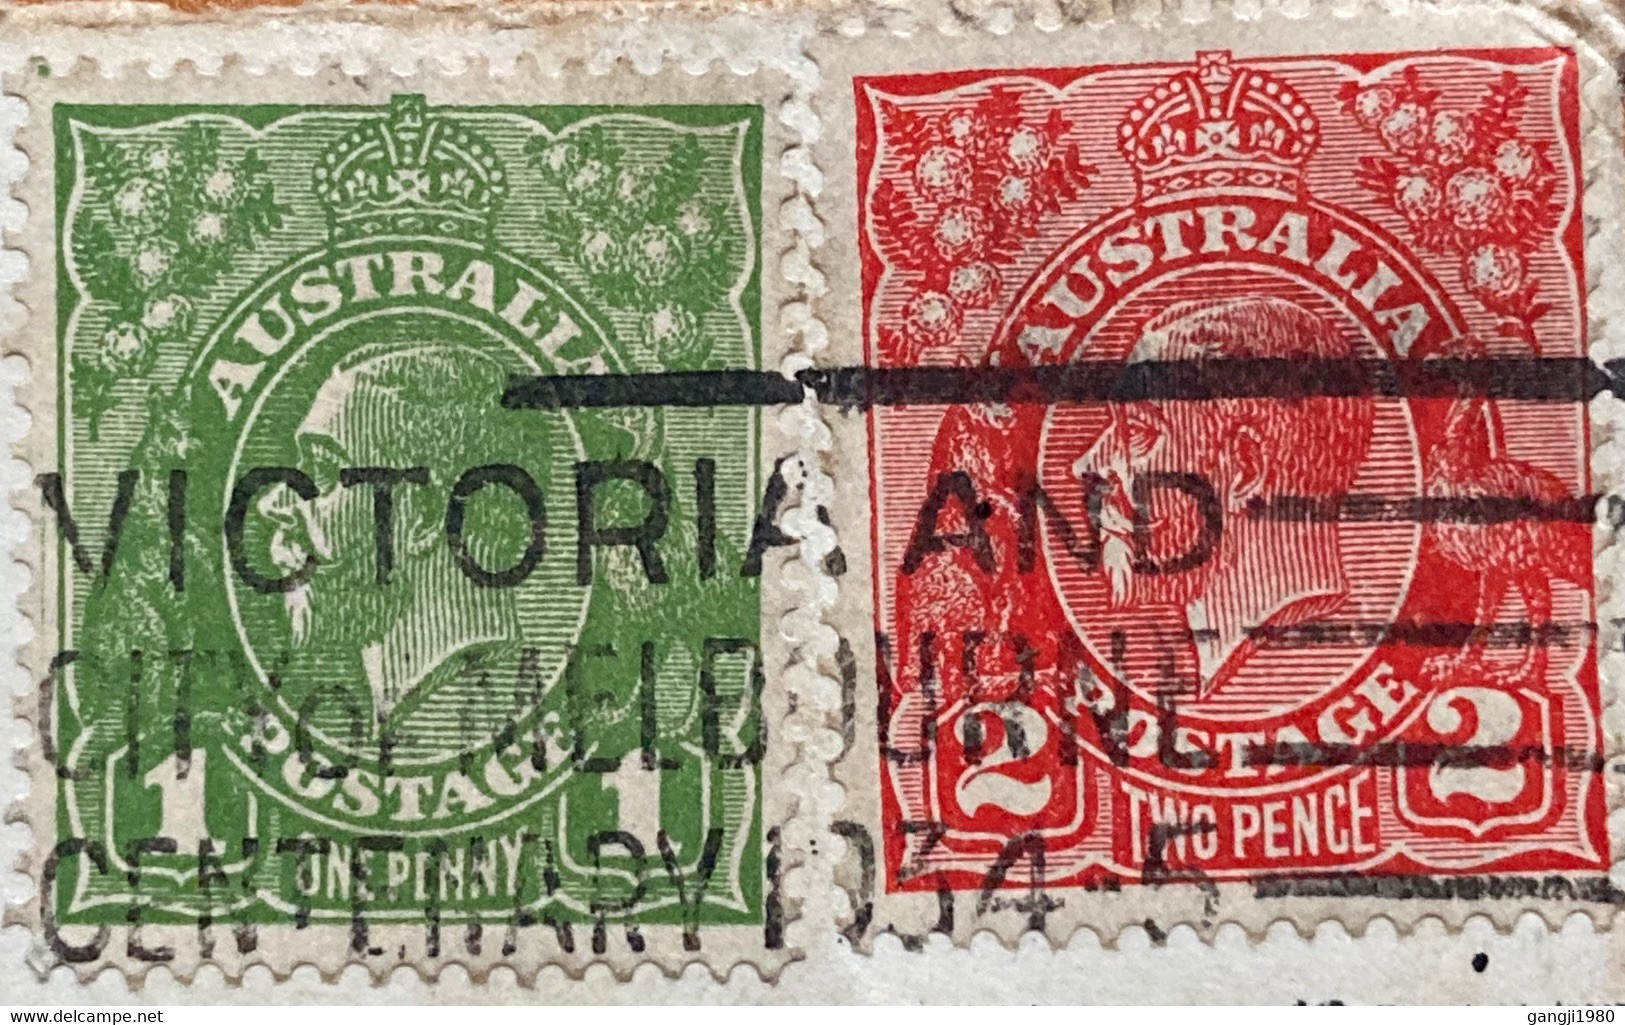 AUSTRALIA 1934, KING GEORGE 2 STAMPS,SLOGAN VICTORIA & CITY MELBOURNE CENTENARY-1934 WITH SPECIAL PREPRINTED USED COVER - Briefe U. Dokumente